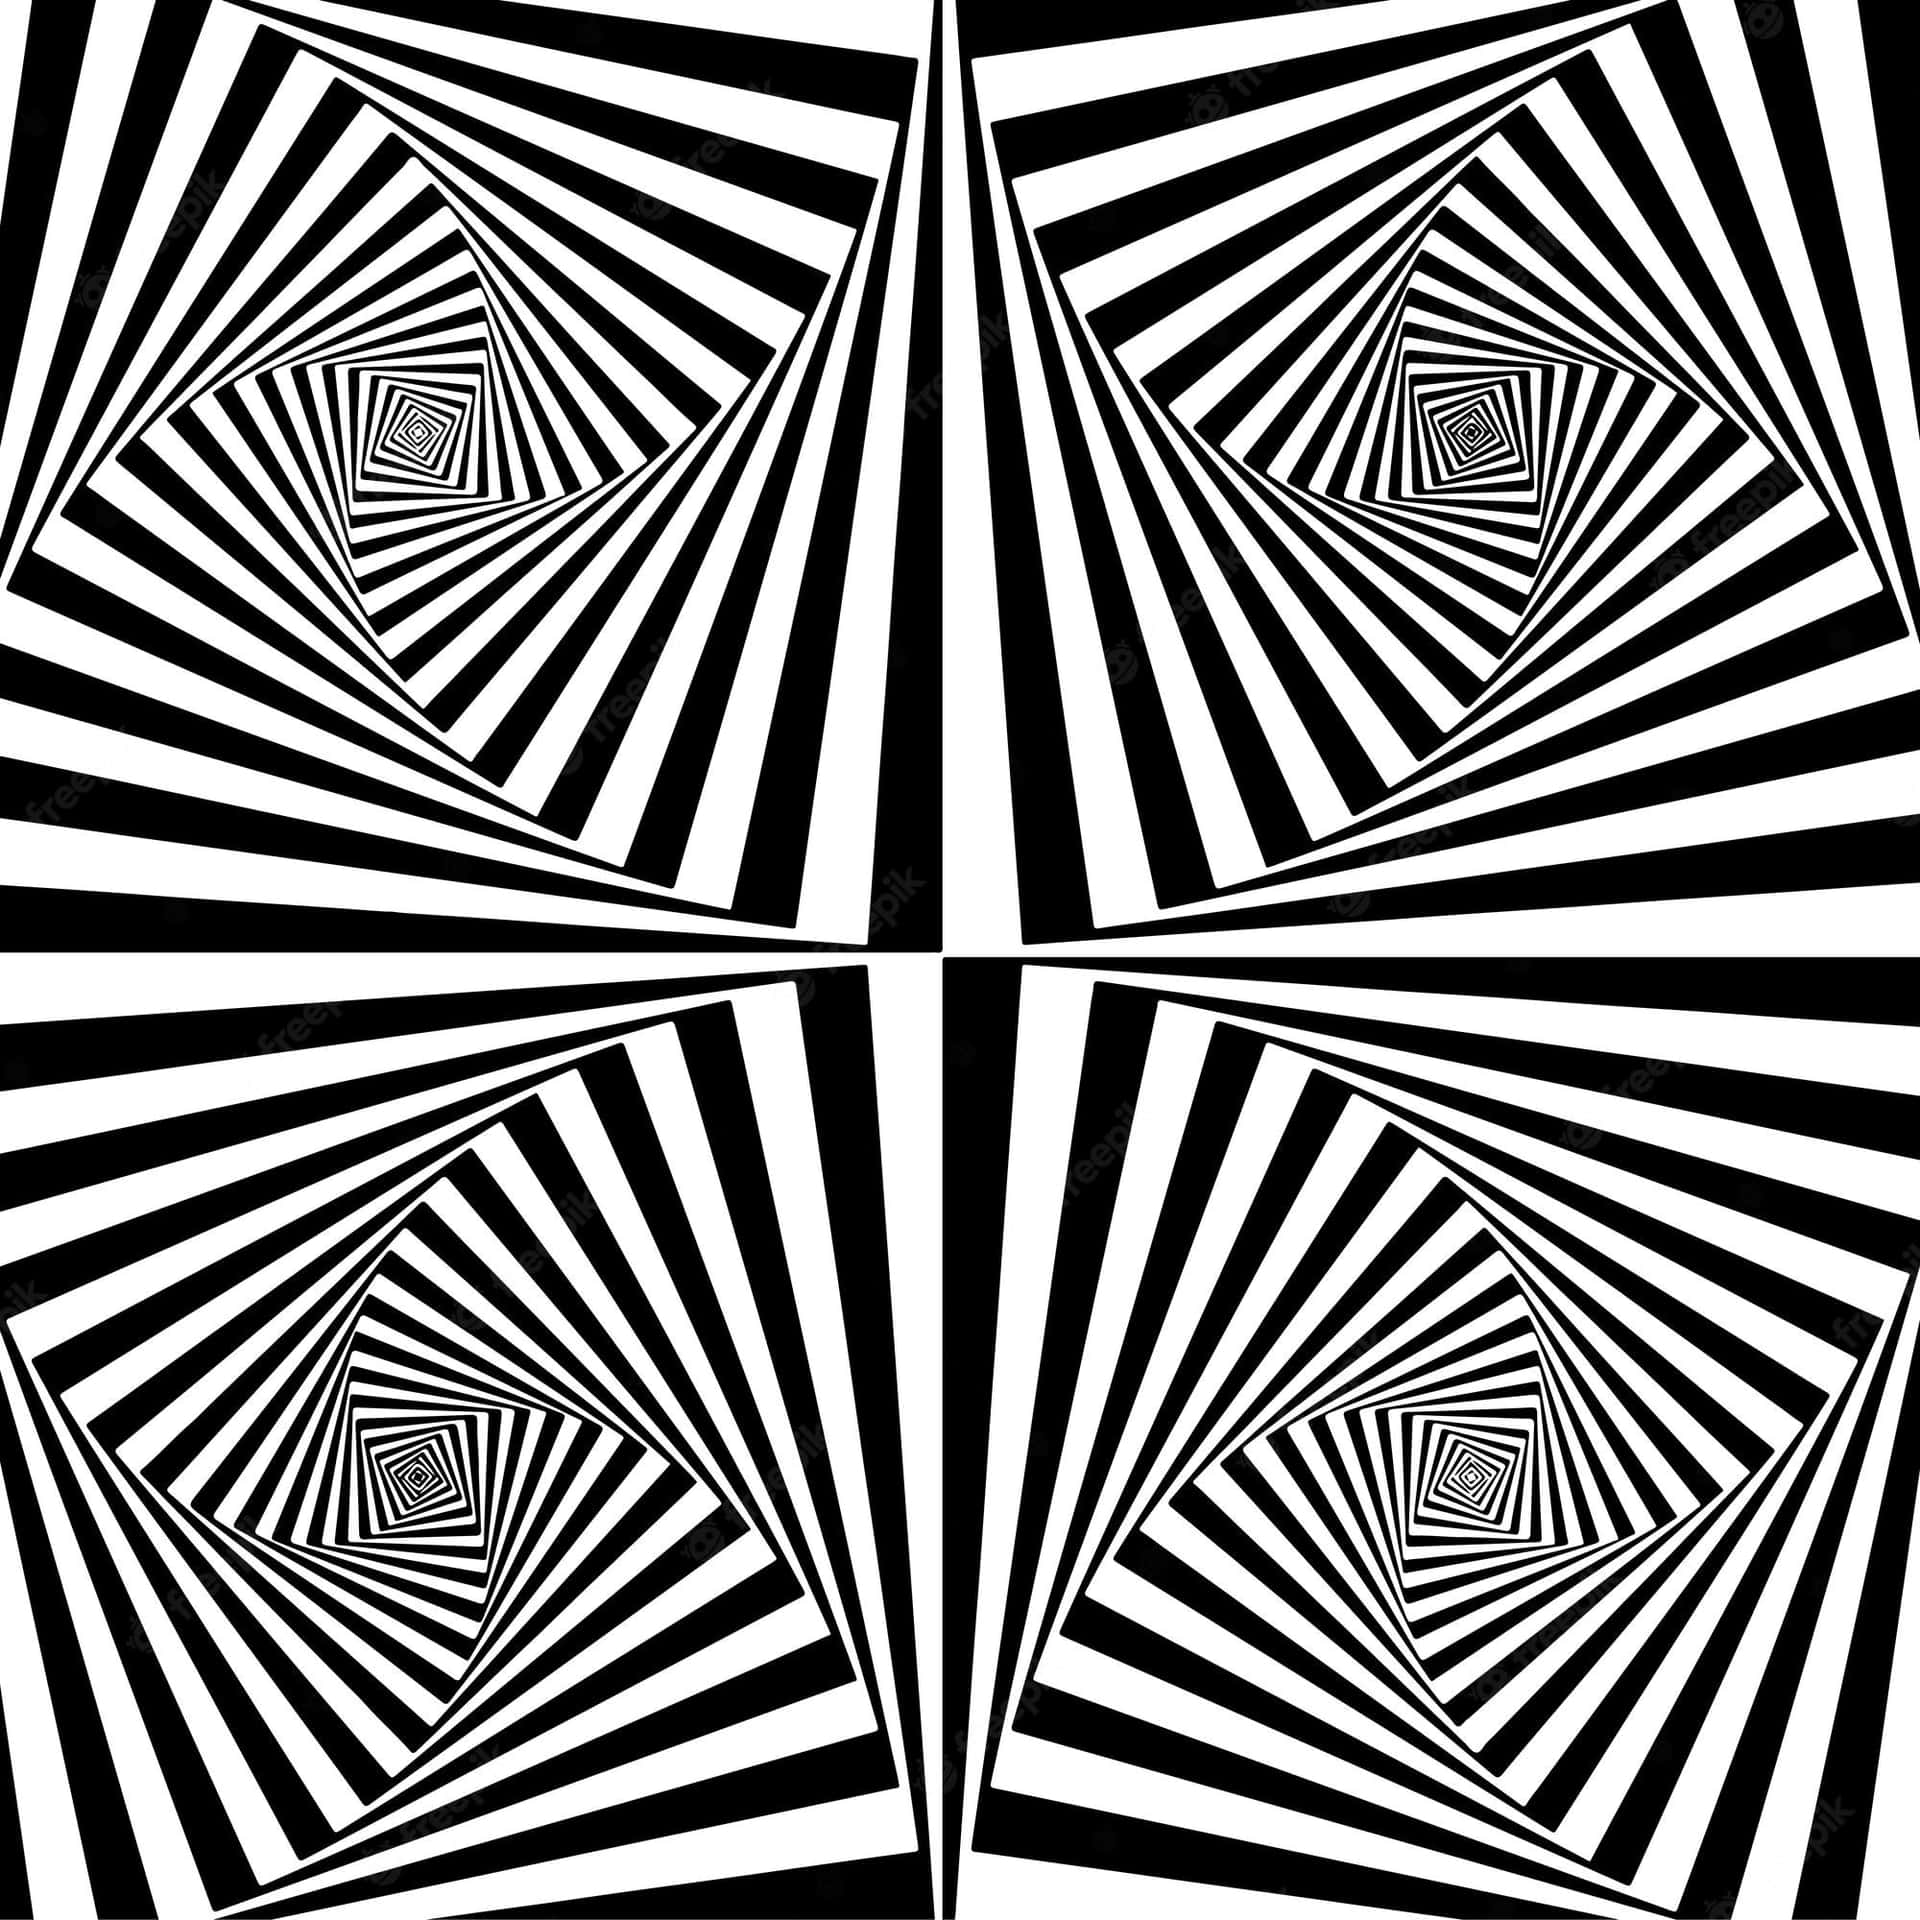 The Mind-Bending Magic of Illusions